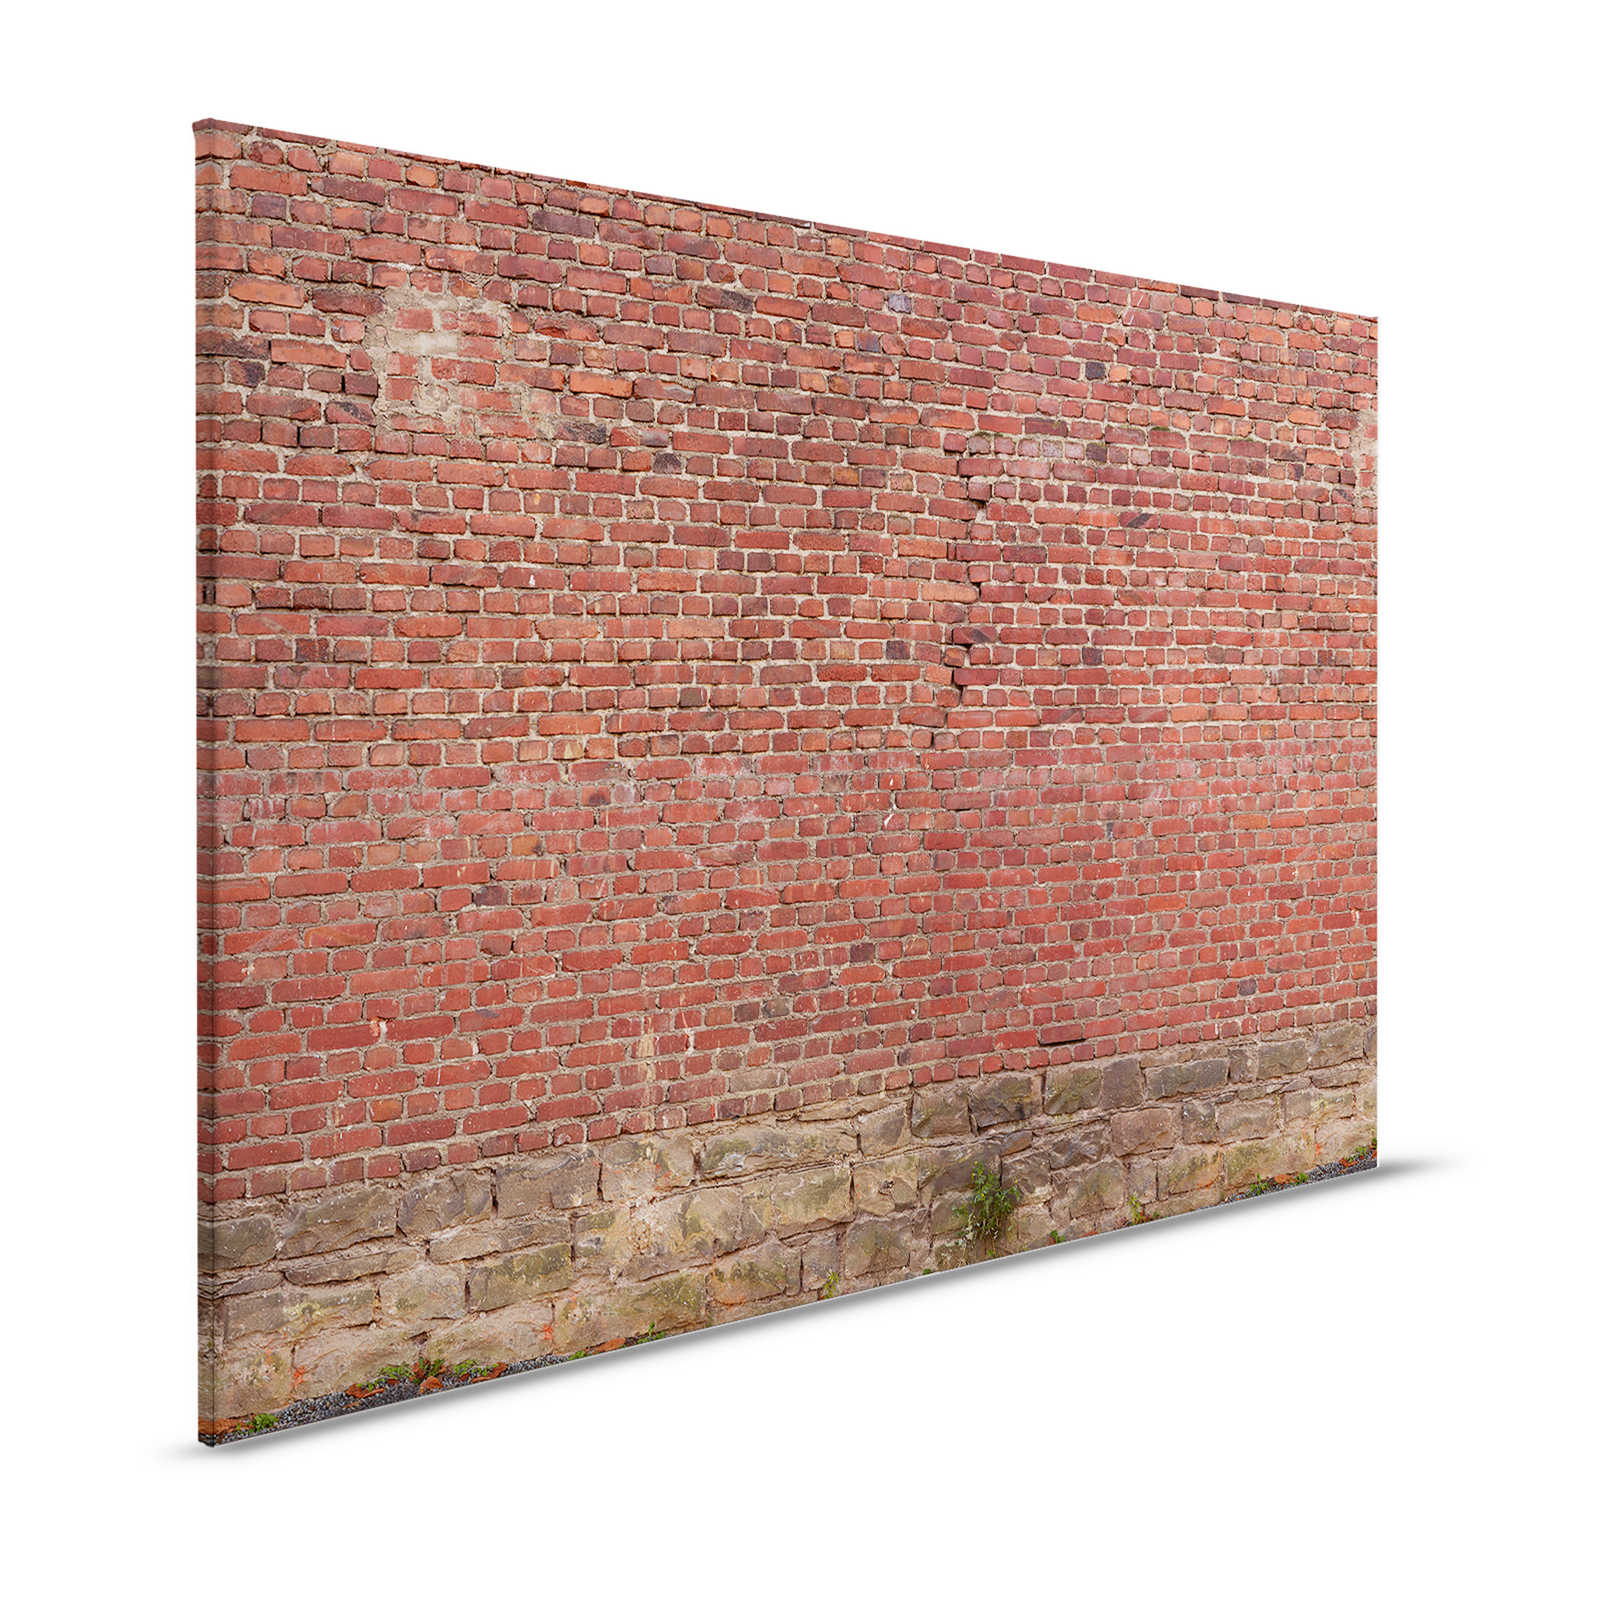 Red Brick Wall Canvas Painting - 1.20 m x 0.80 m
